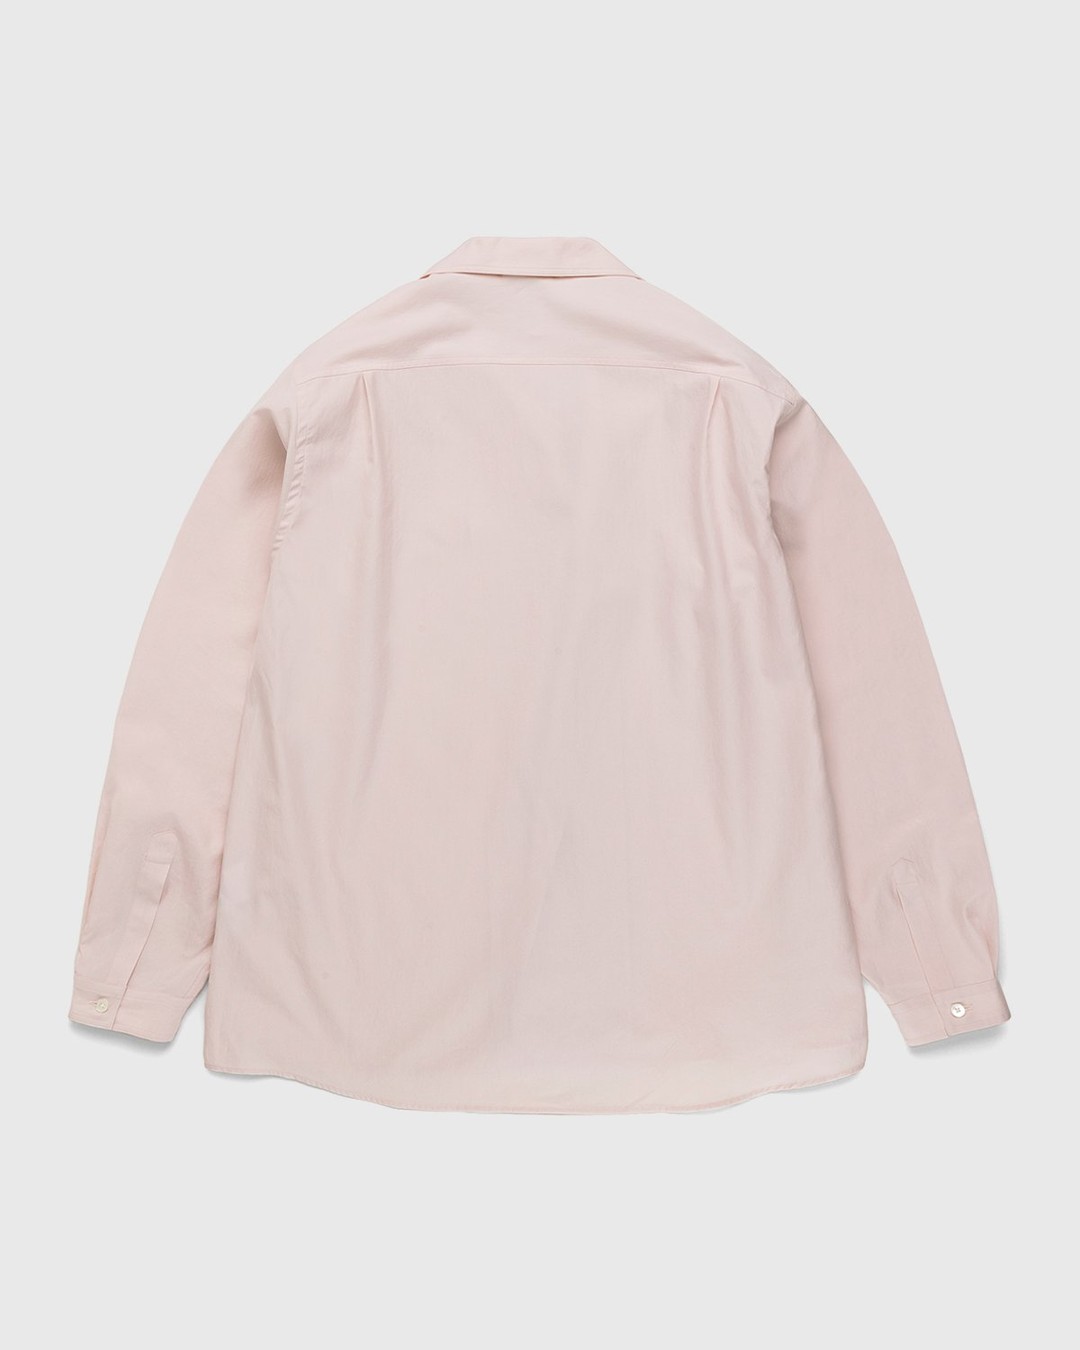 Auralee – Washed Finx Twill Pullover Shirt Light Pink - Longsleeve Shirts - Pink - Image 2